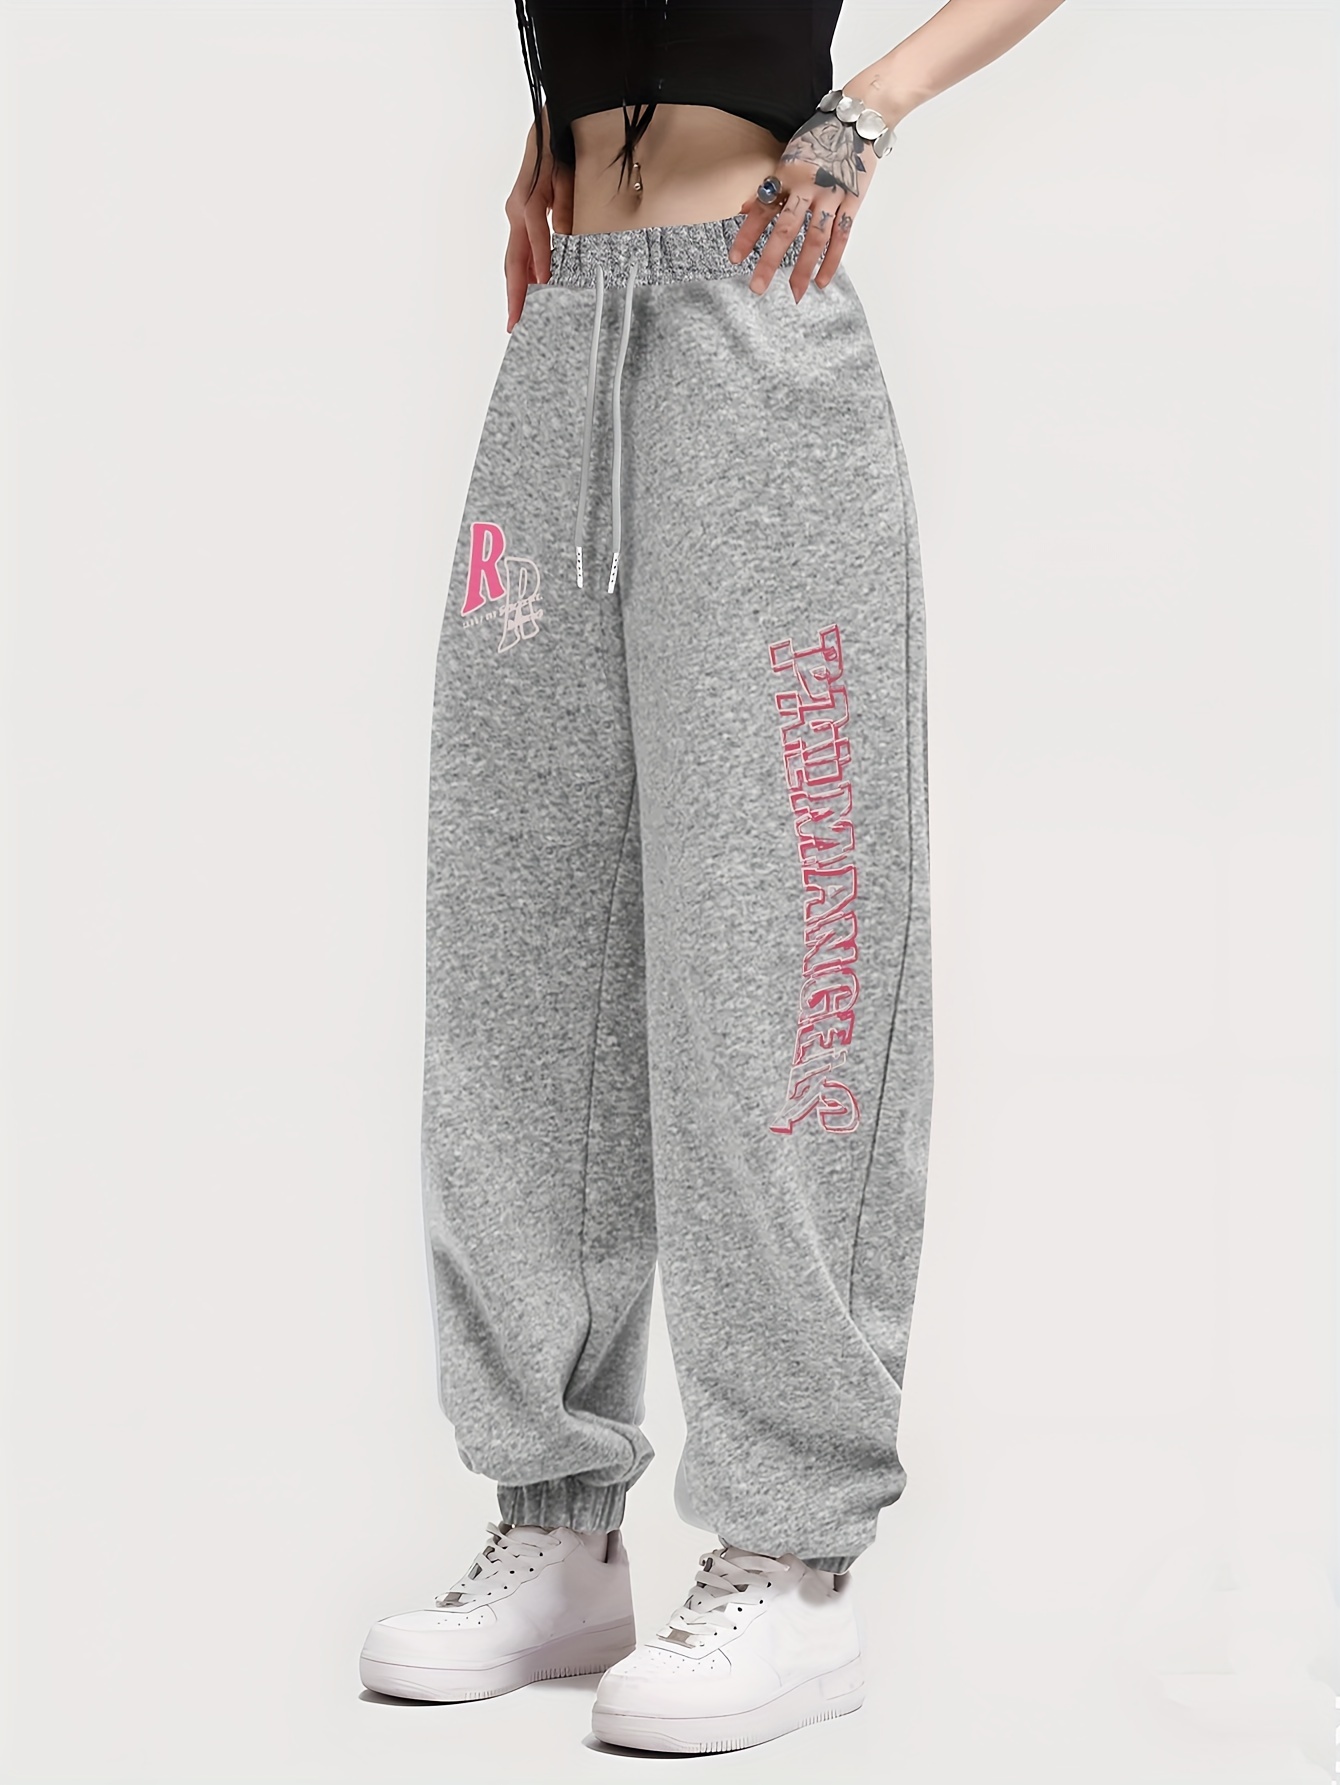 Joggers with Drawstring Waist